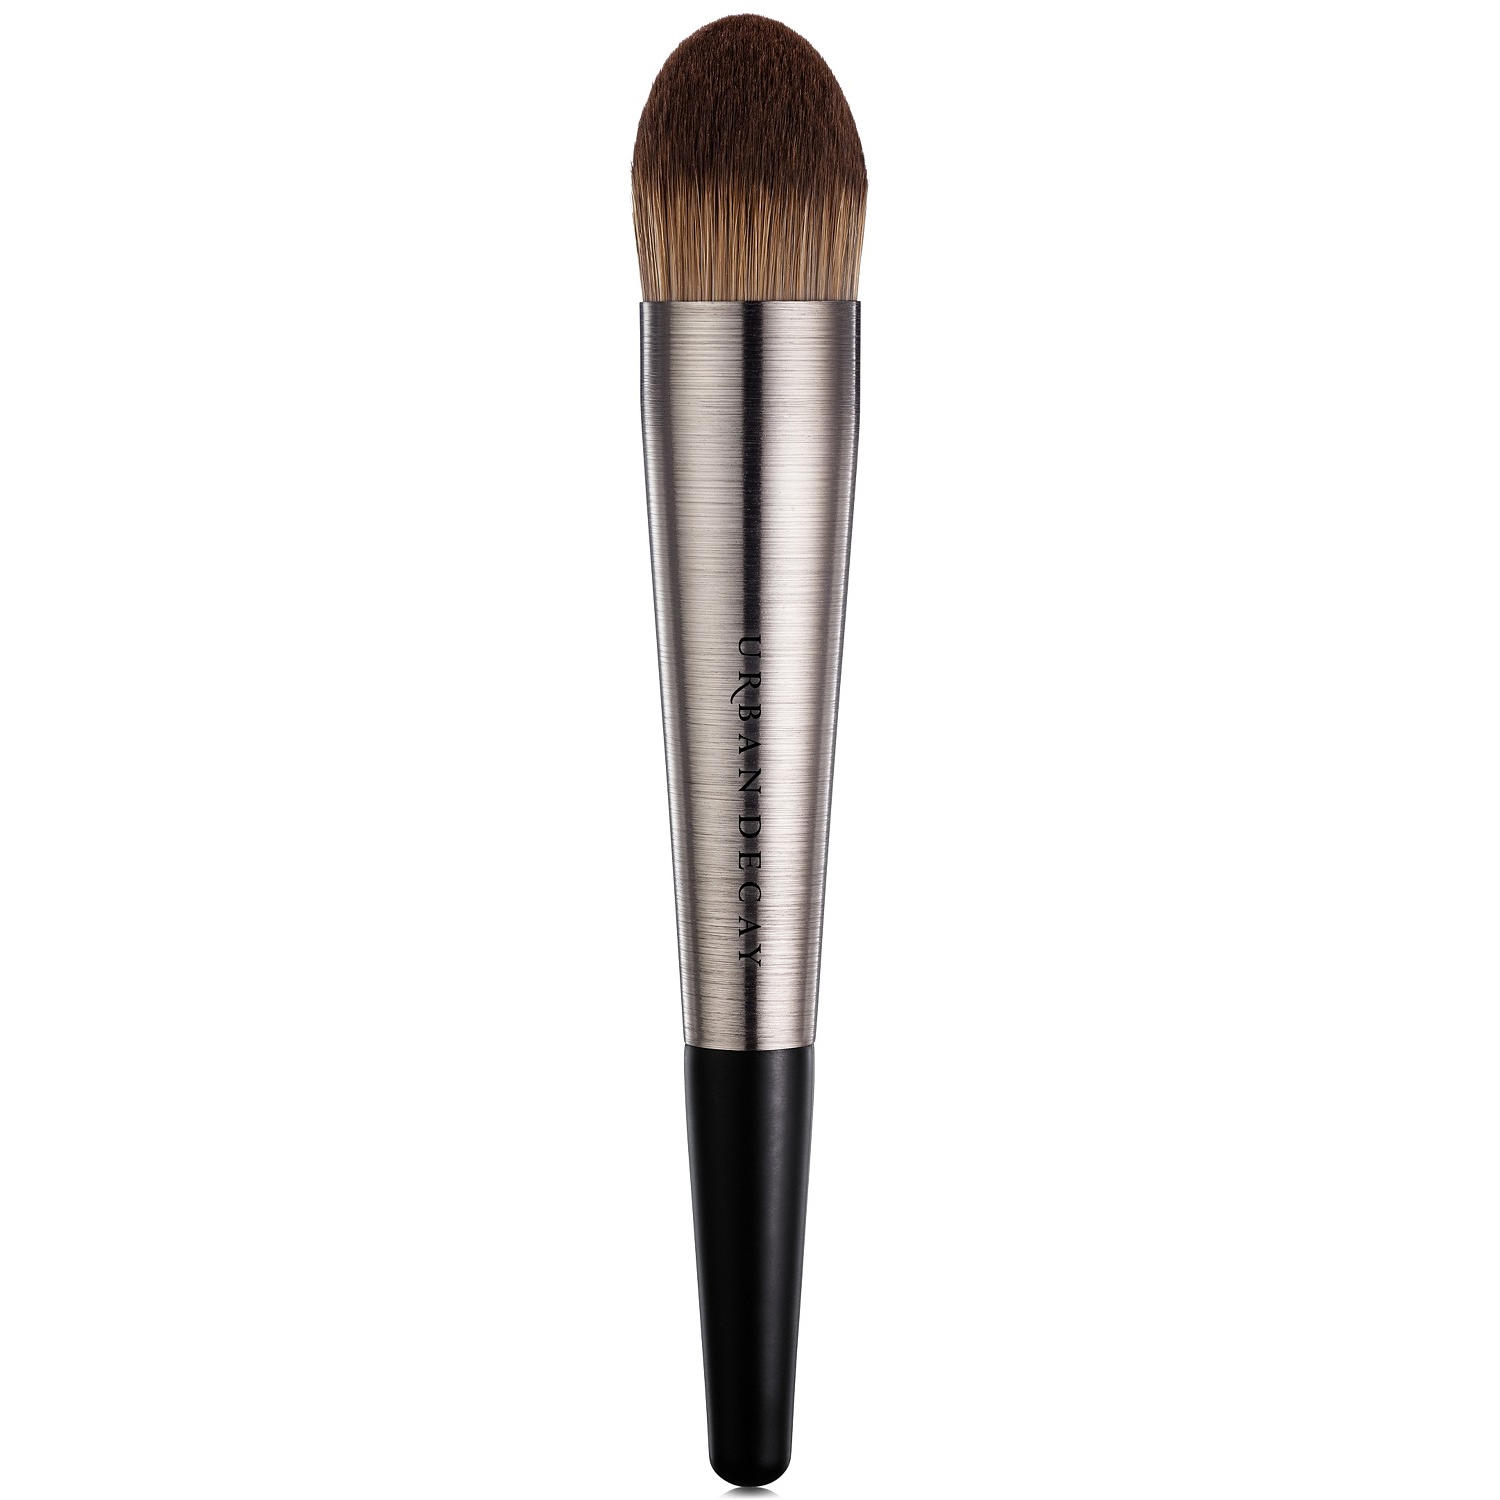 Urban Decay Large Tapered Foundation Brush F-101